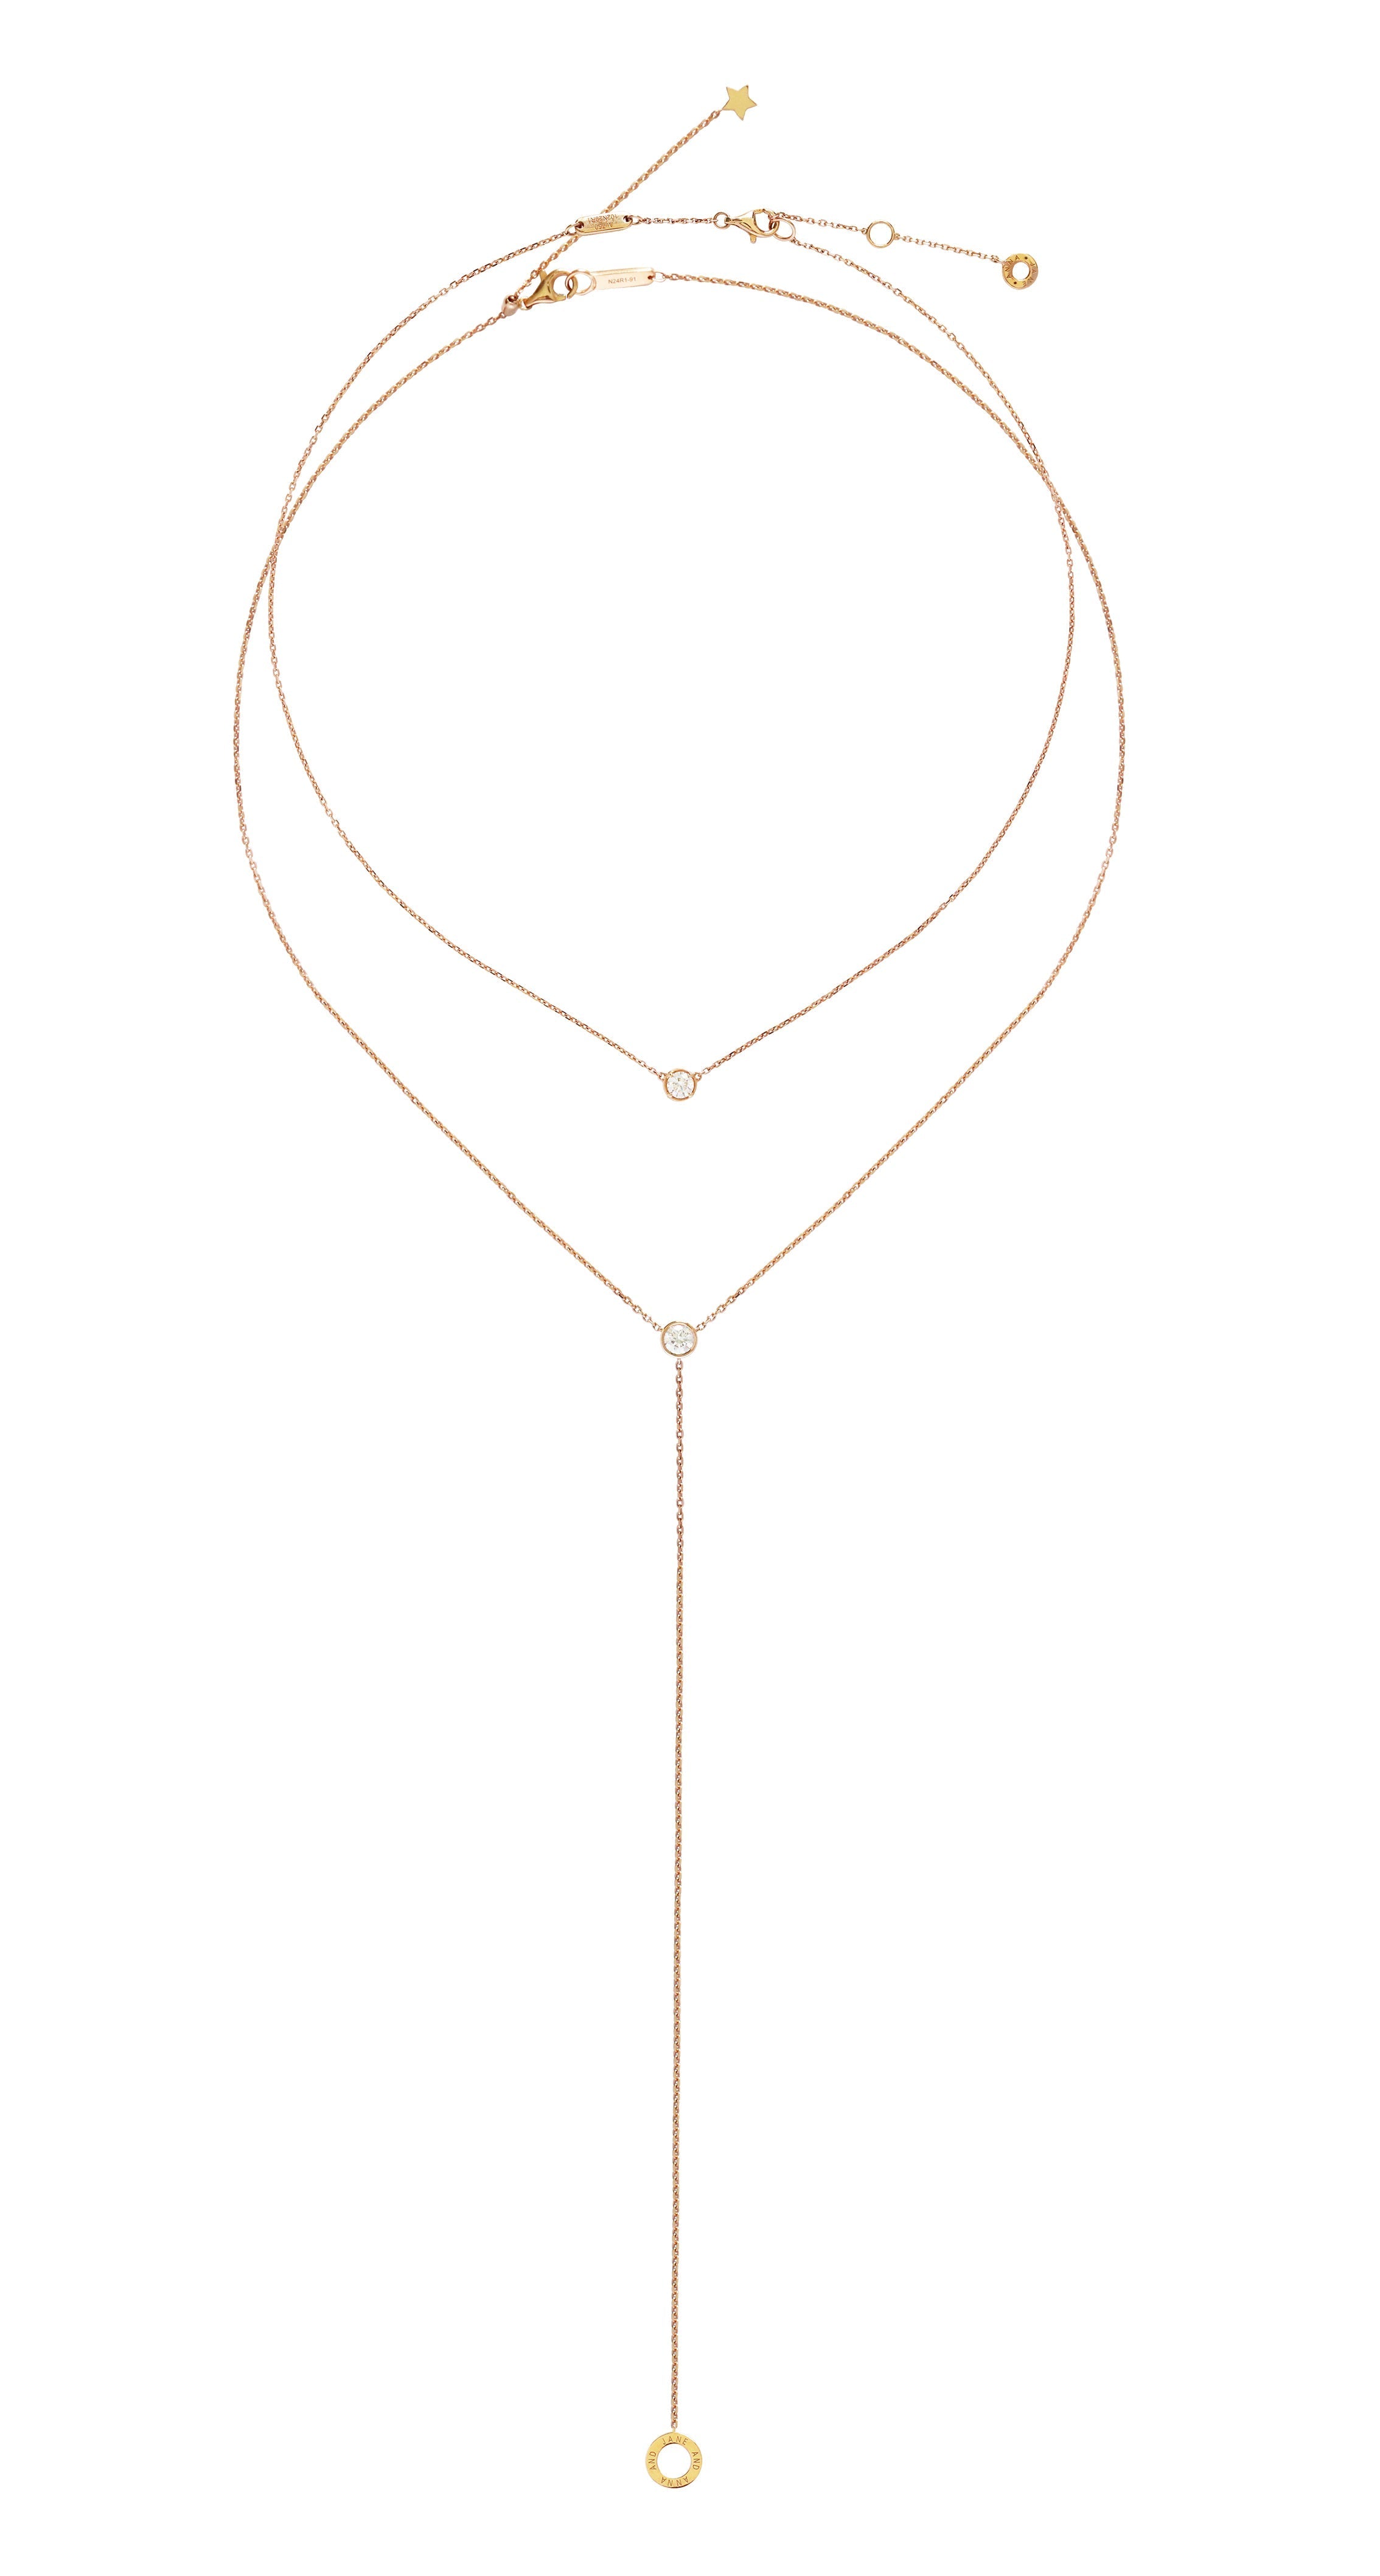 V+Y Diamond Necklace Set in Yellow / Rose / White Gold